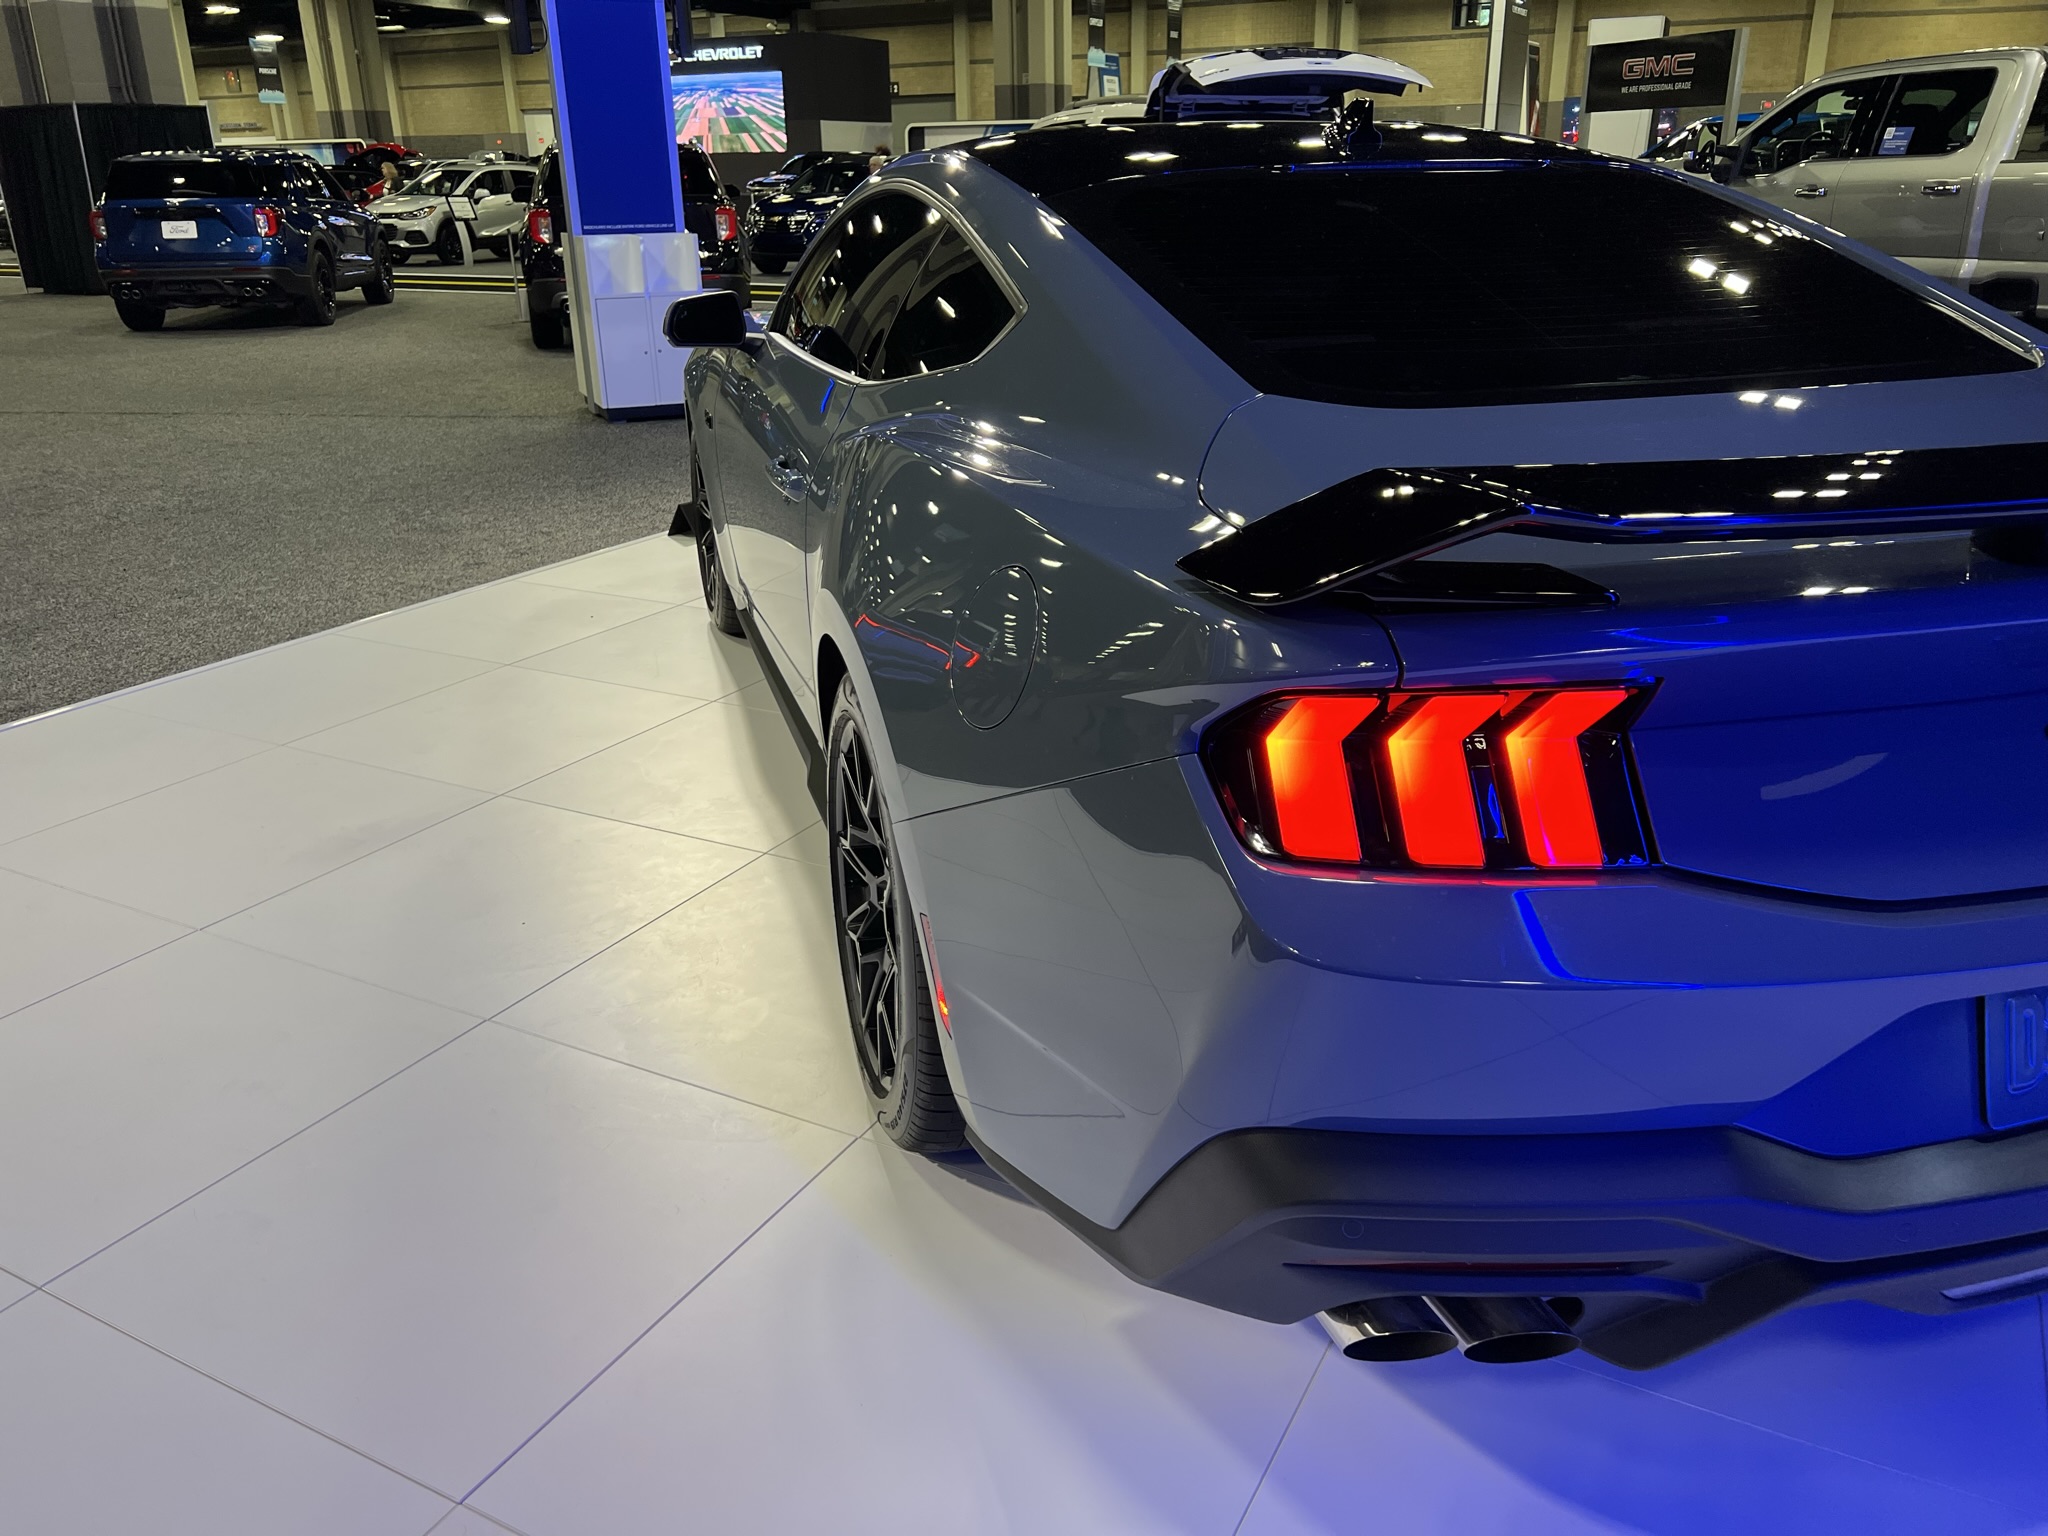 S650 Mustang S650 GT @ Charlotte Auto Show IMG_1806.JPEG